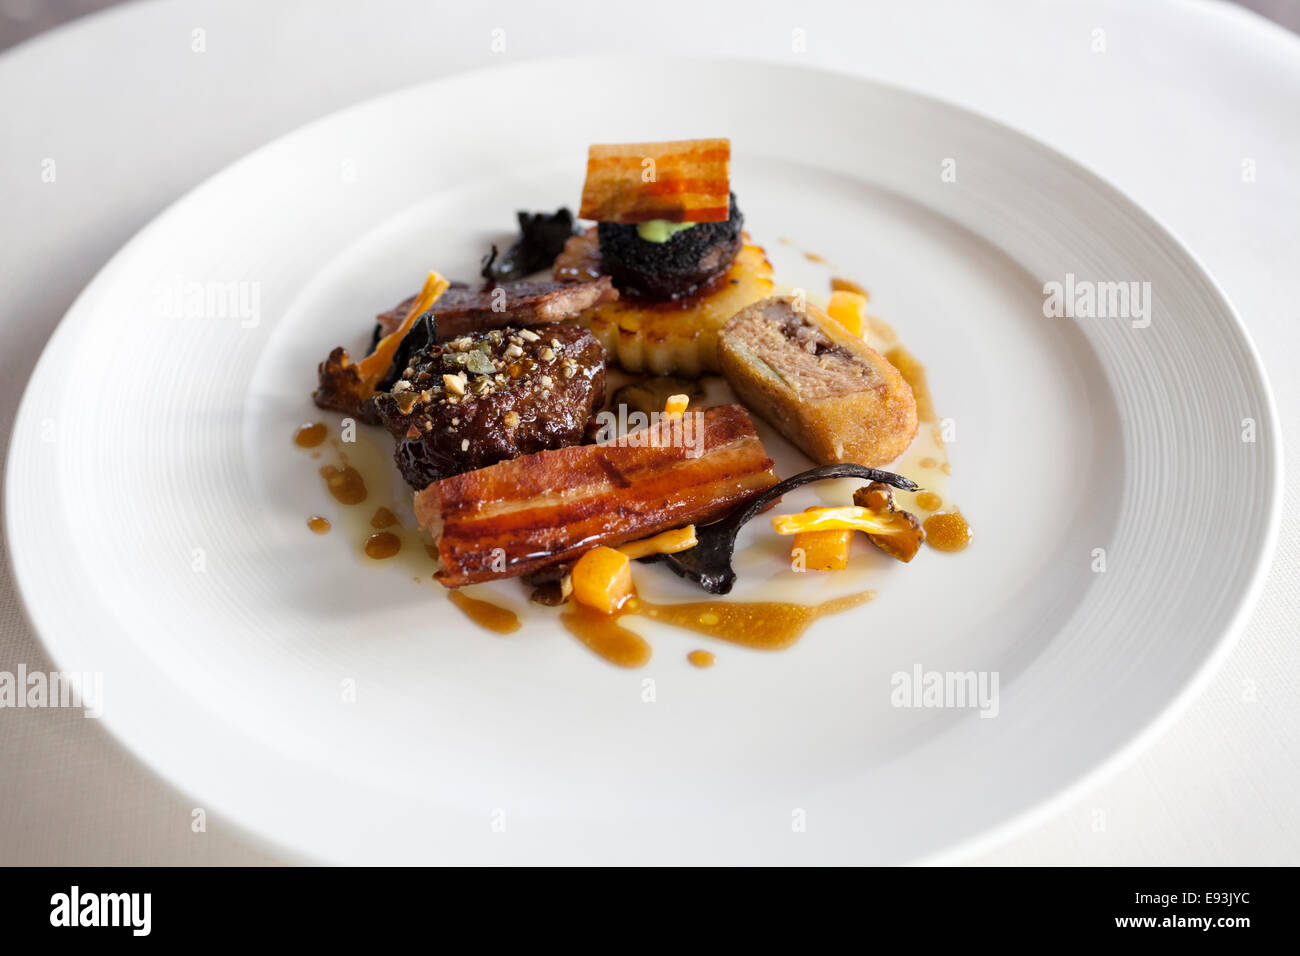 A pork dish prepared by Andrew Fairlie at Gleneagles Stock Photo